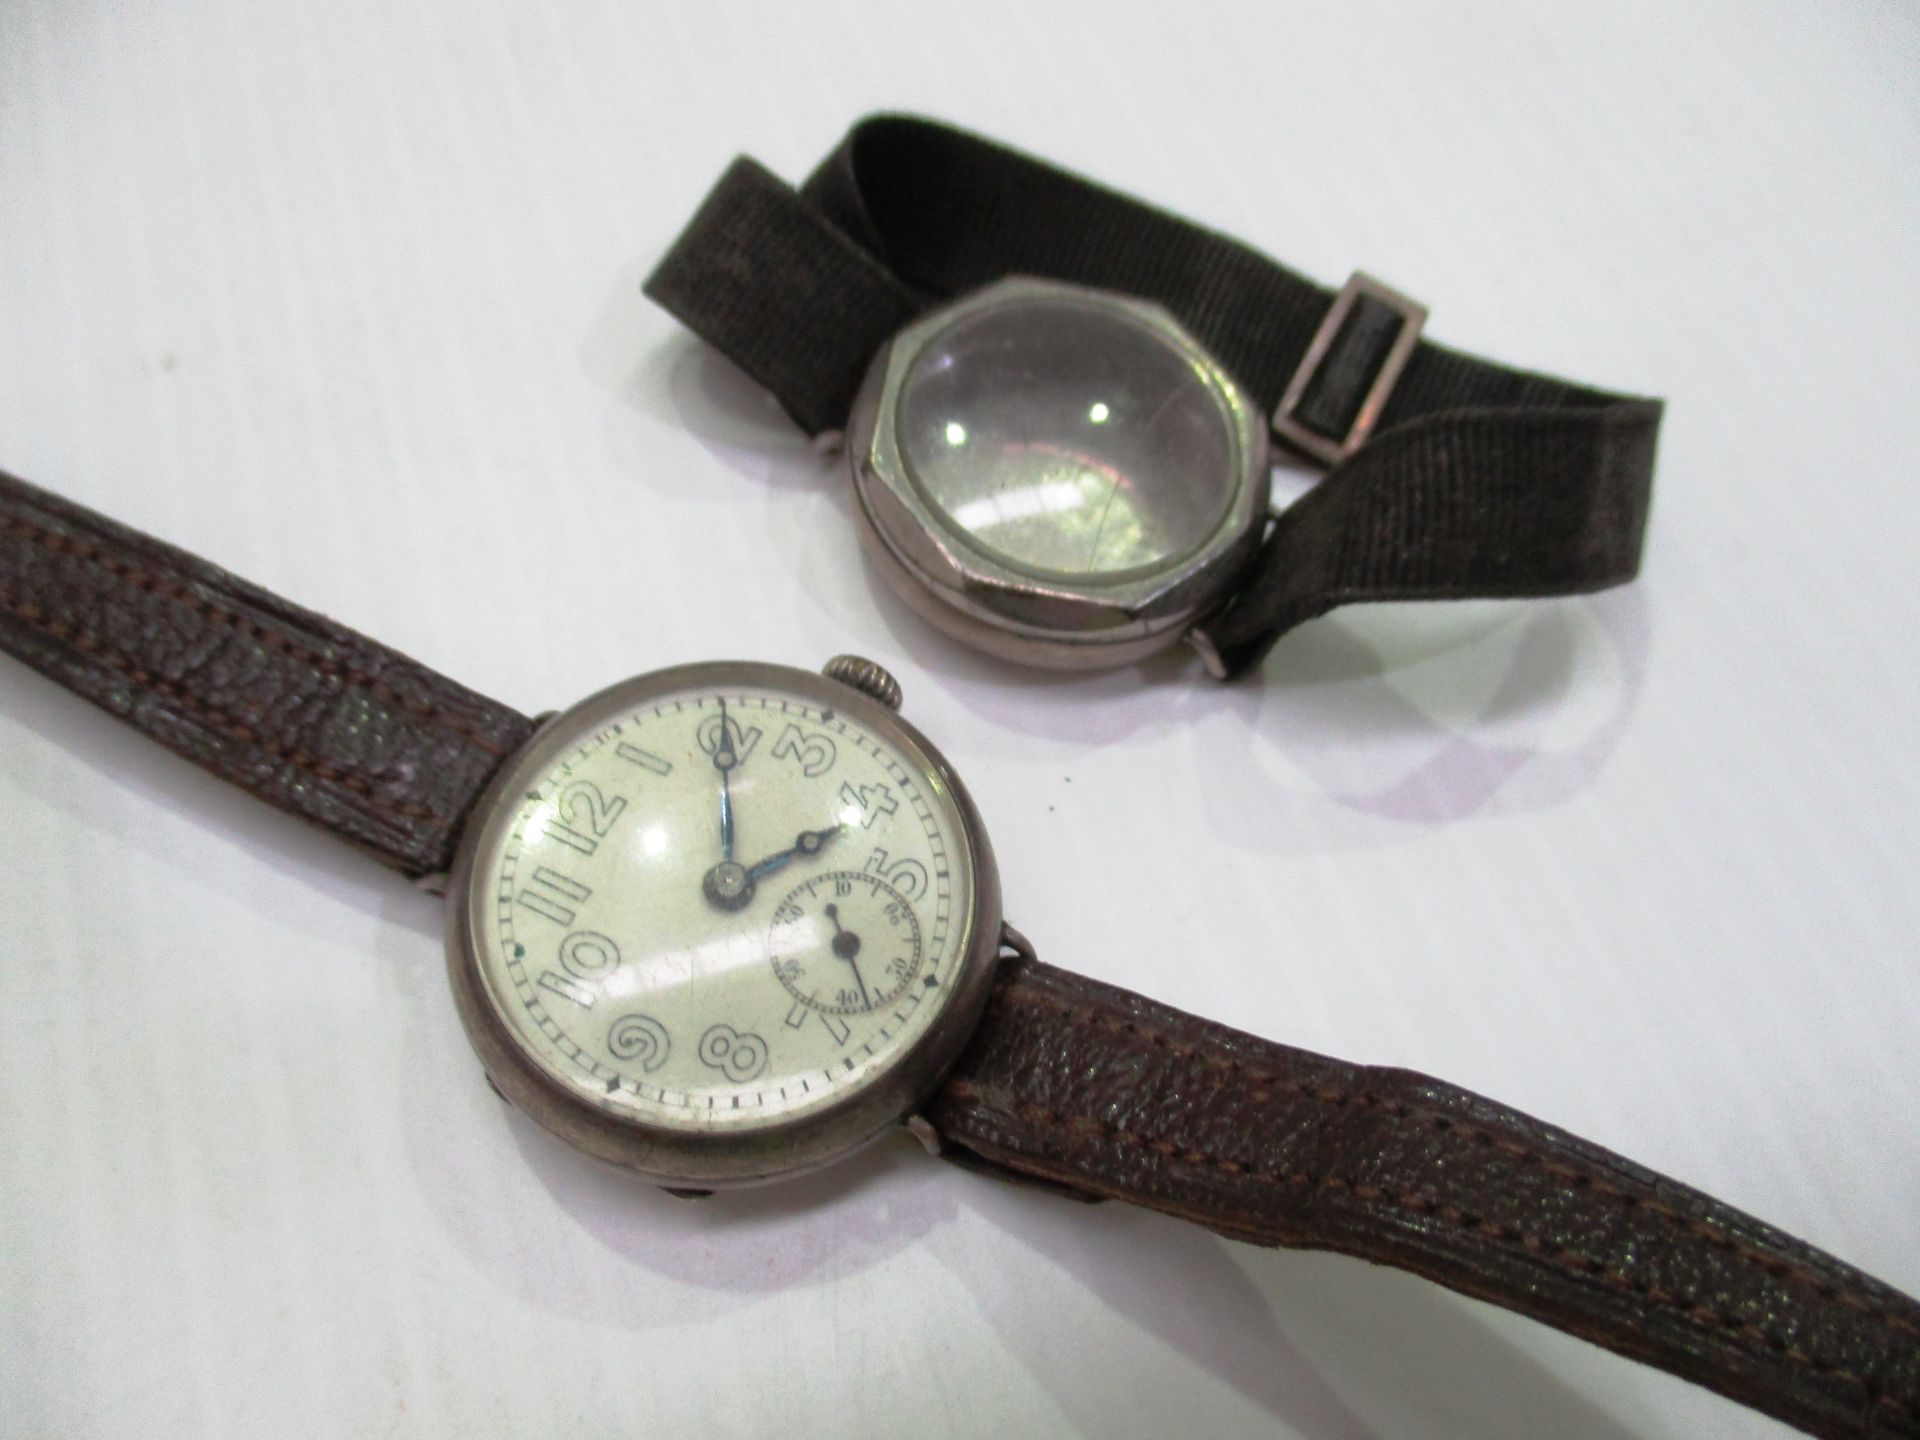 A gents silver cased wristwatch with brown leather strap and a gents silver wristwatch case (no